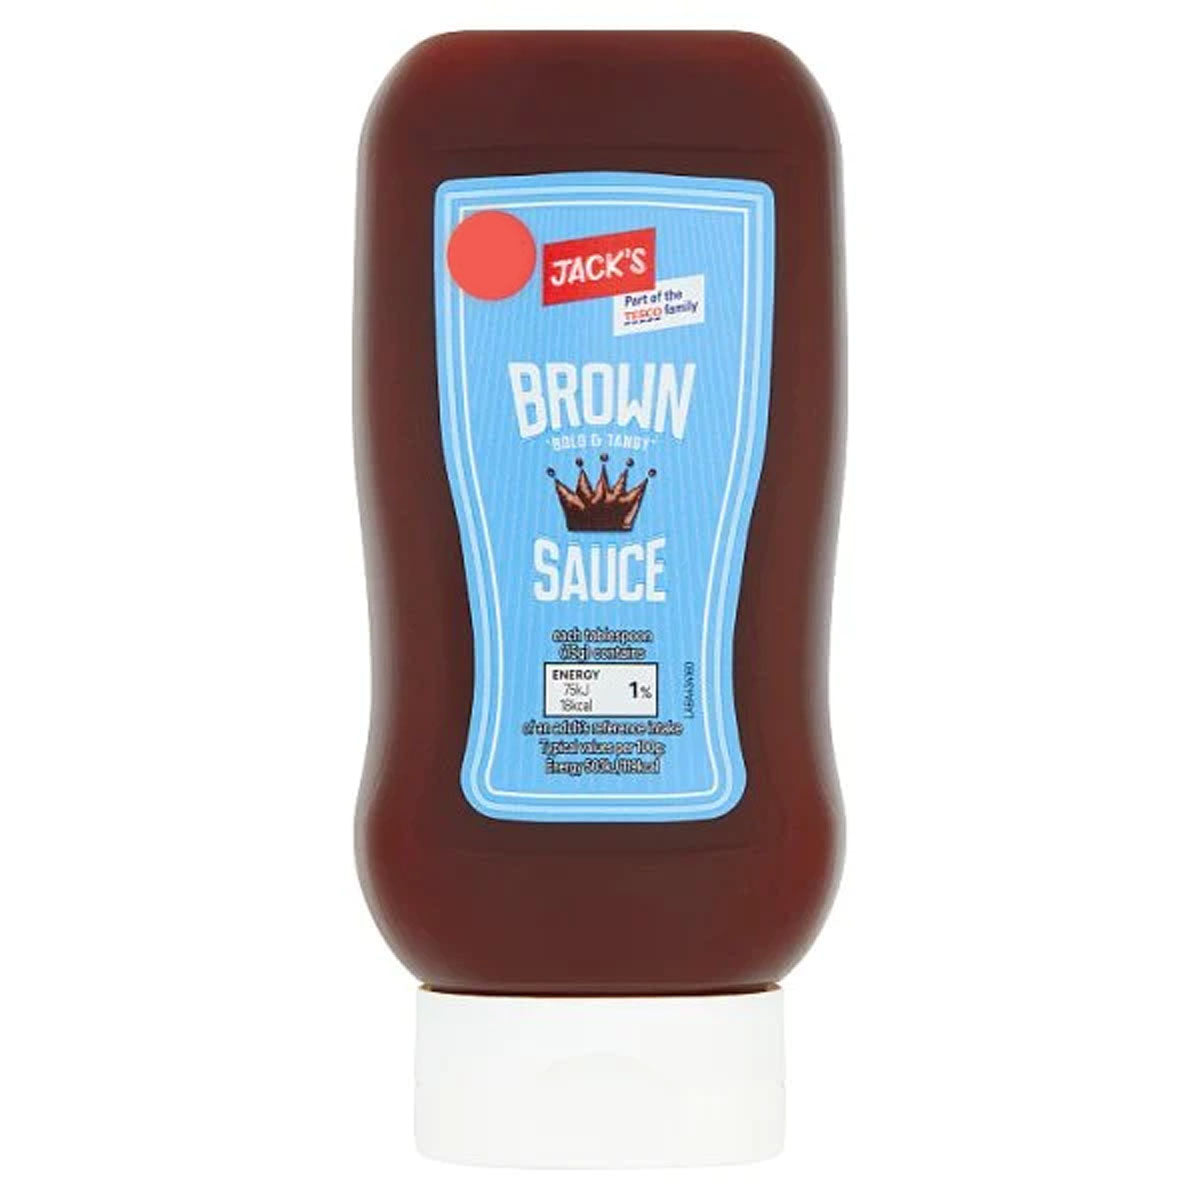 A Jacks - Brown Sauce - 450g on a white background.